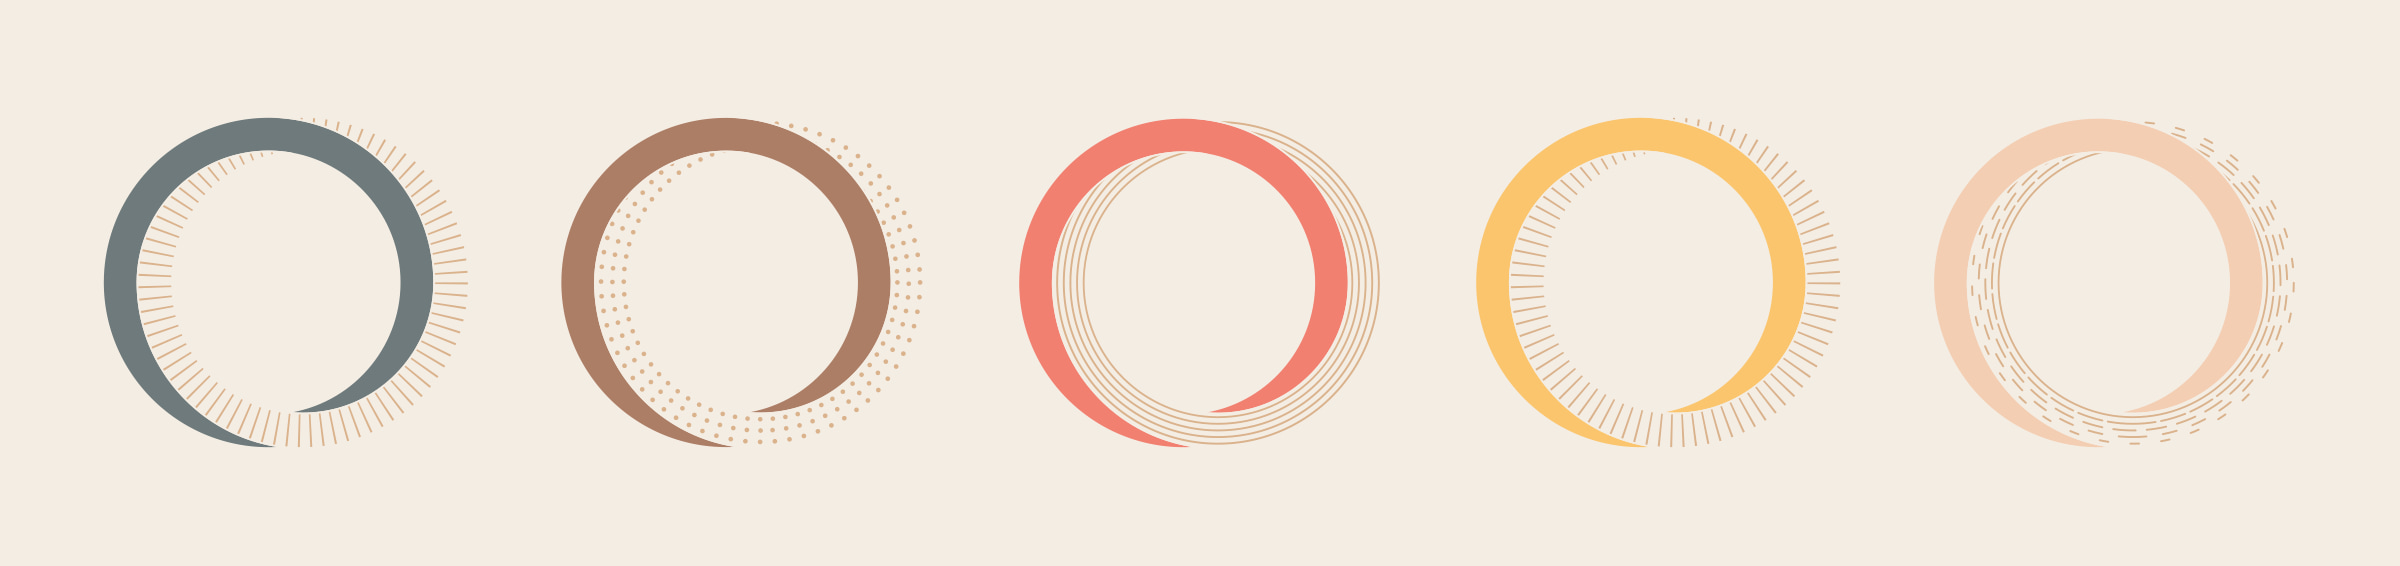 circles-rings-beauty-products-package-redesign-branding-woolworths